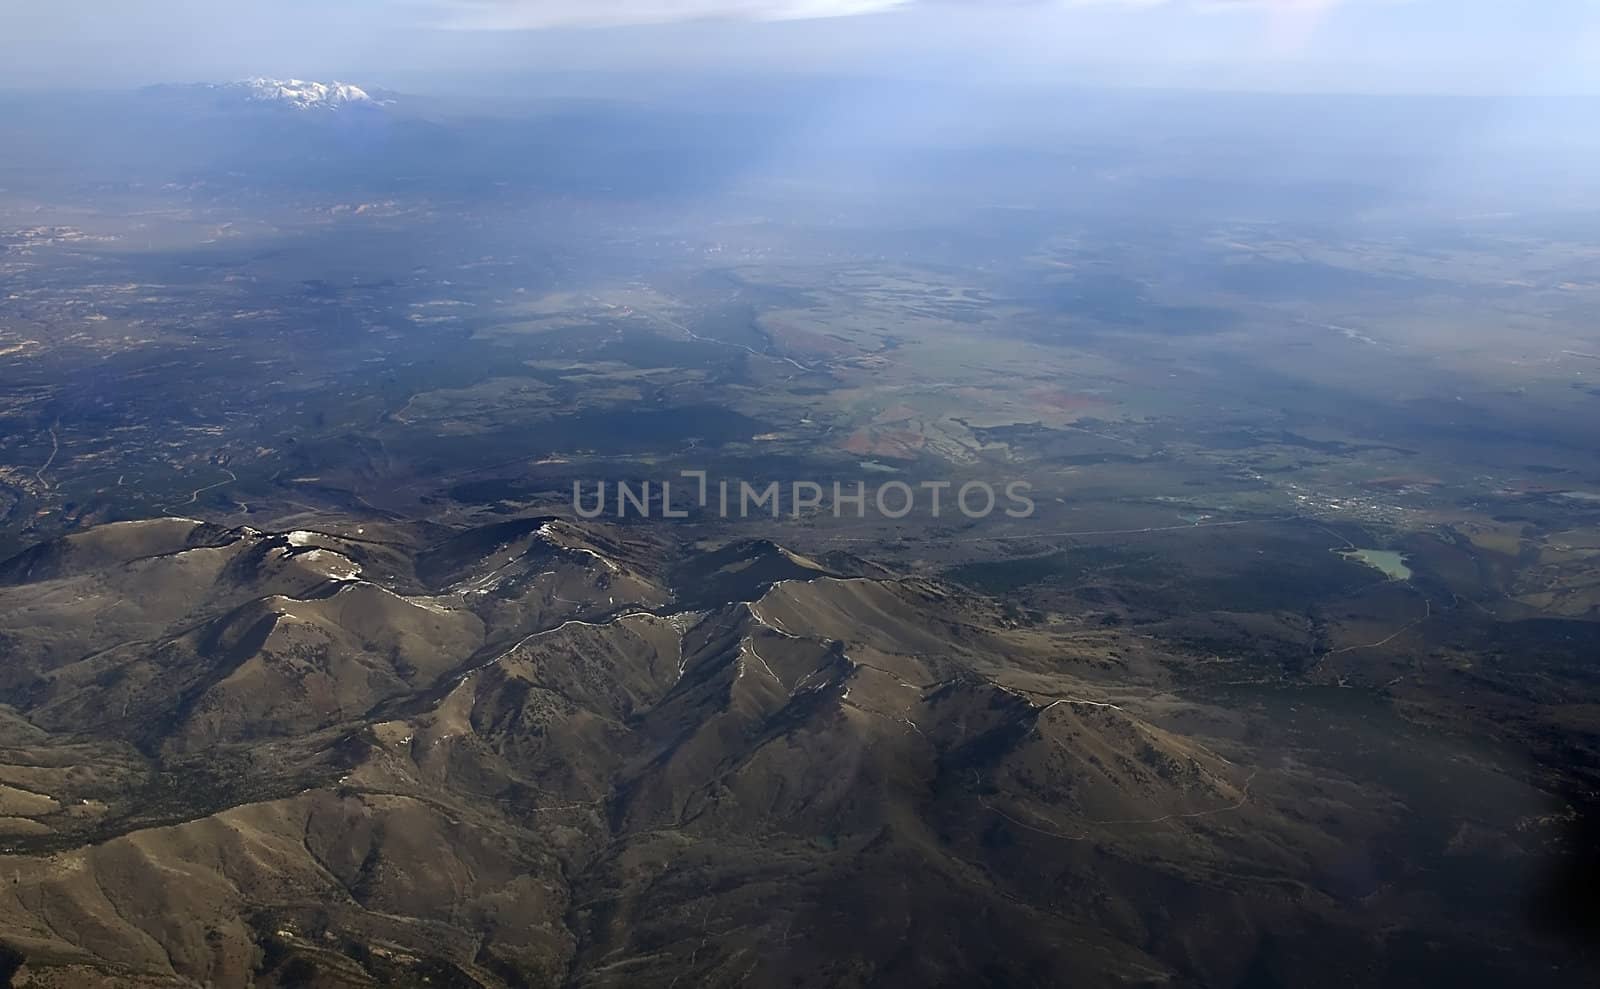 An Aerial image of a beautiful mountain range in the Sierra Nevadas